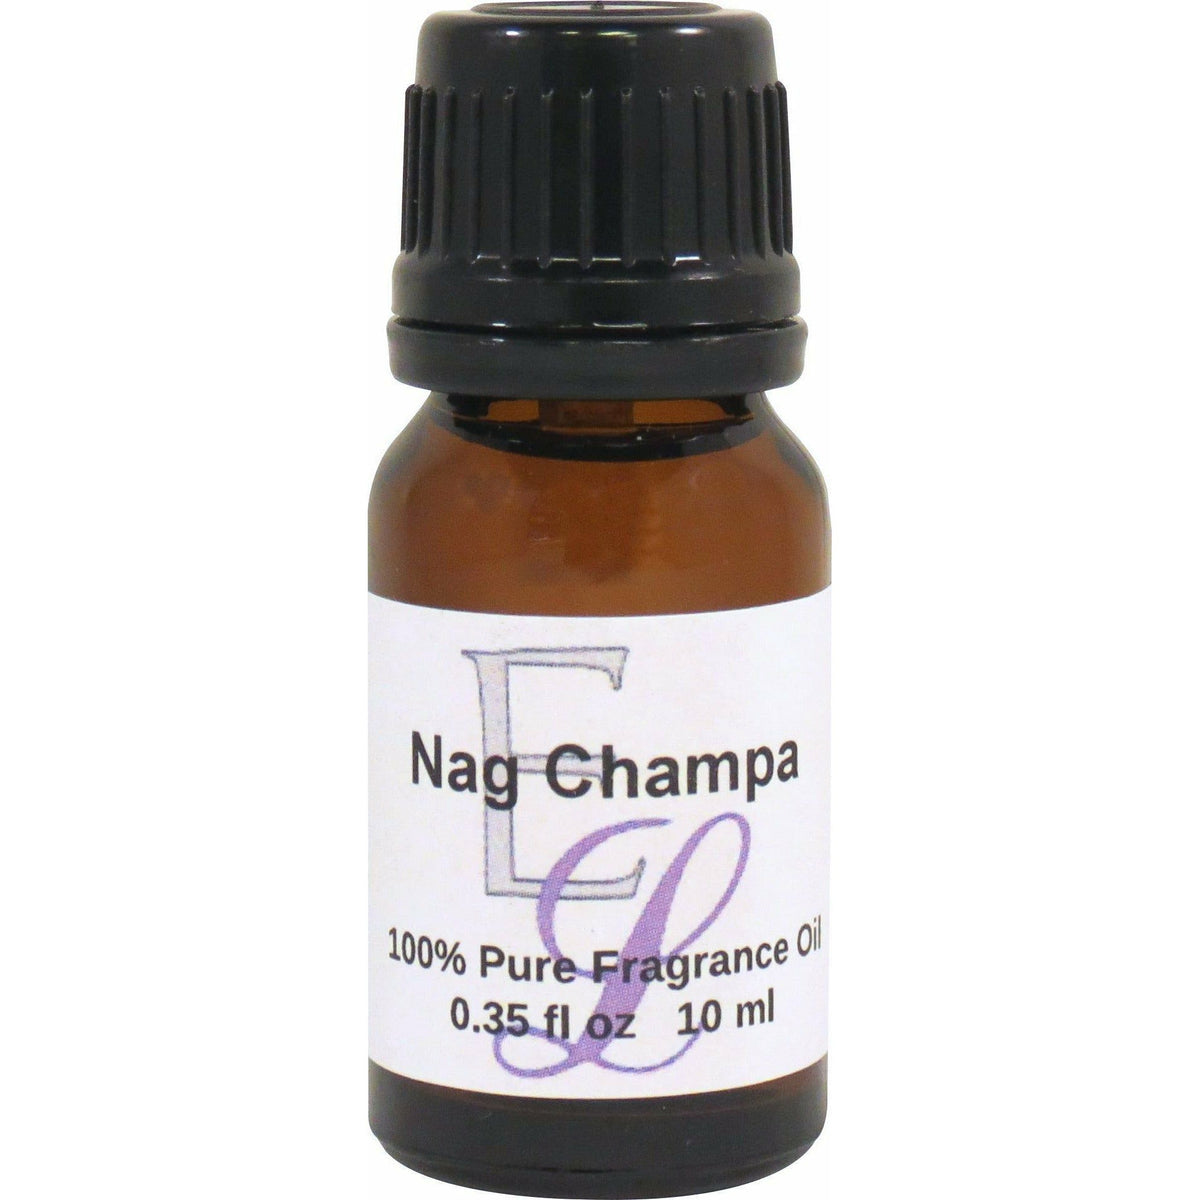 Nag Champa Fragrance Oil, 10 ml Premium, Long Lasting Diffuser Oils, A –  Eclectic Lady